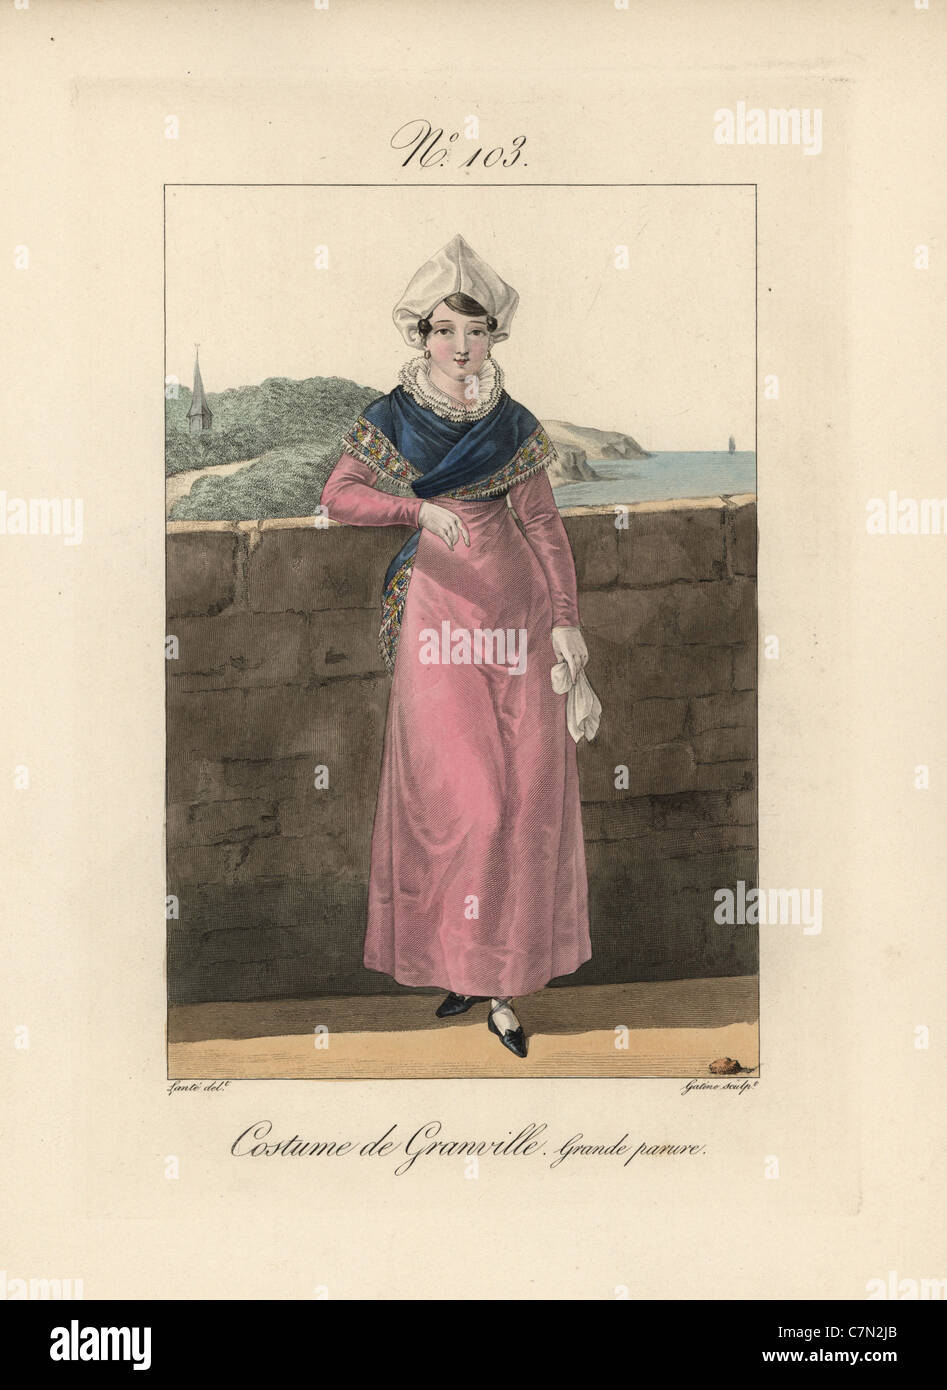 Costume of Granville. A woman in her finery. This headdress is called the 'conine.' Stock Photo